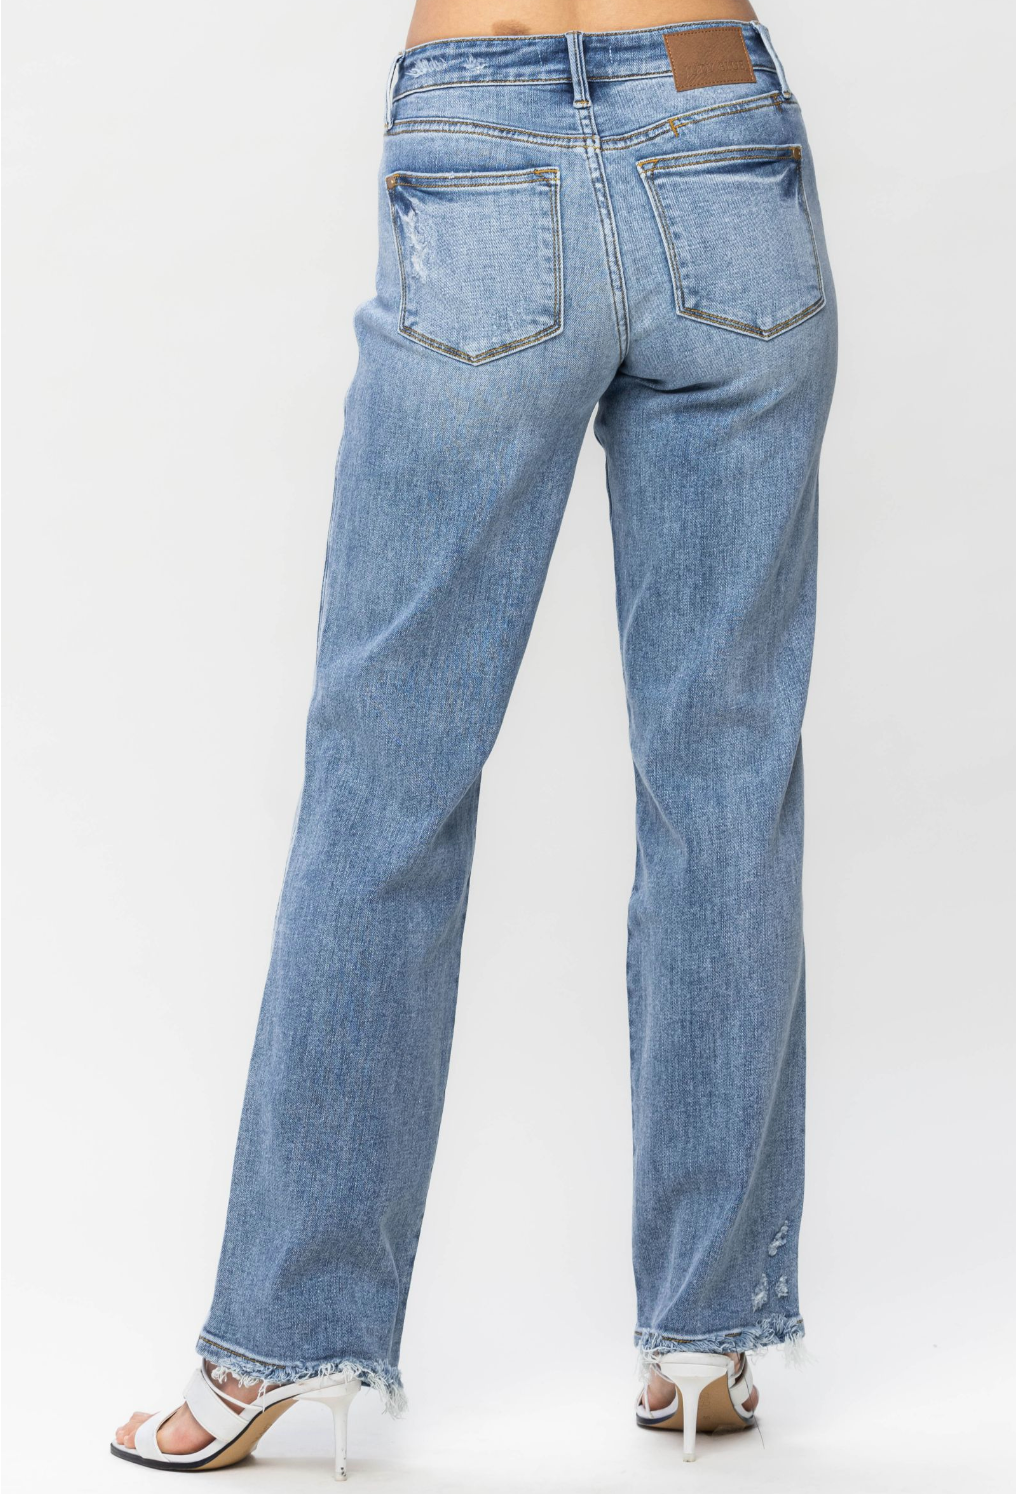 Judy Blue Mid-Rise Cell Phone Pocket Dad Jean